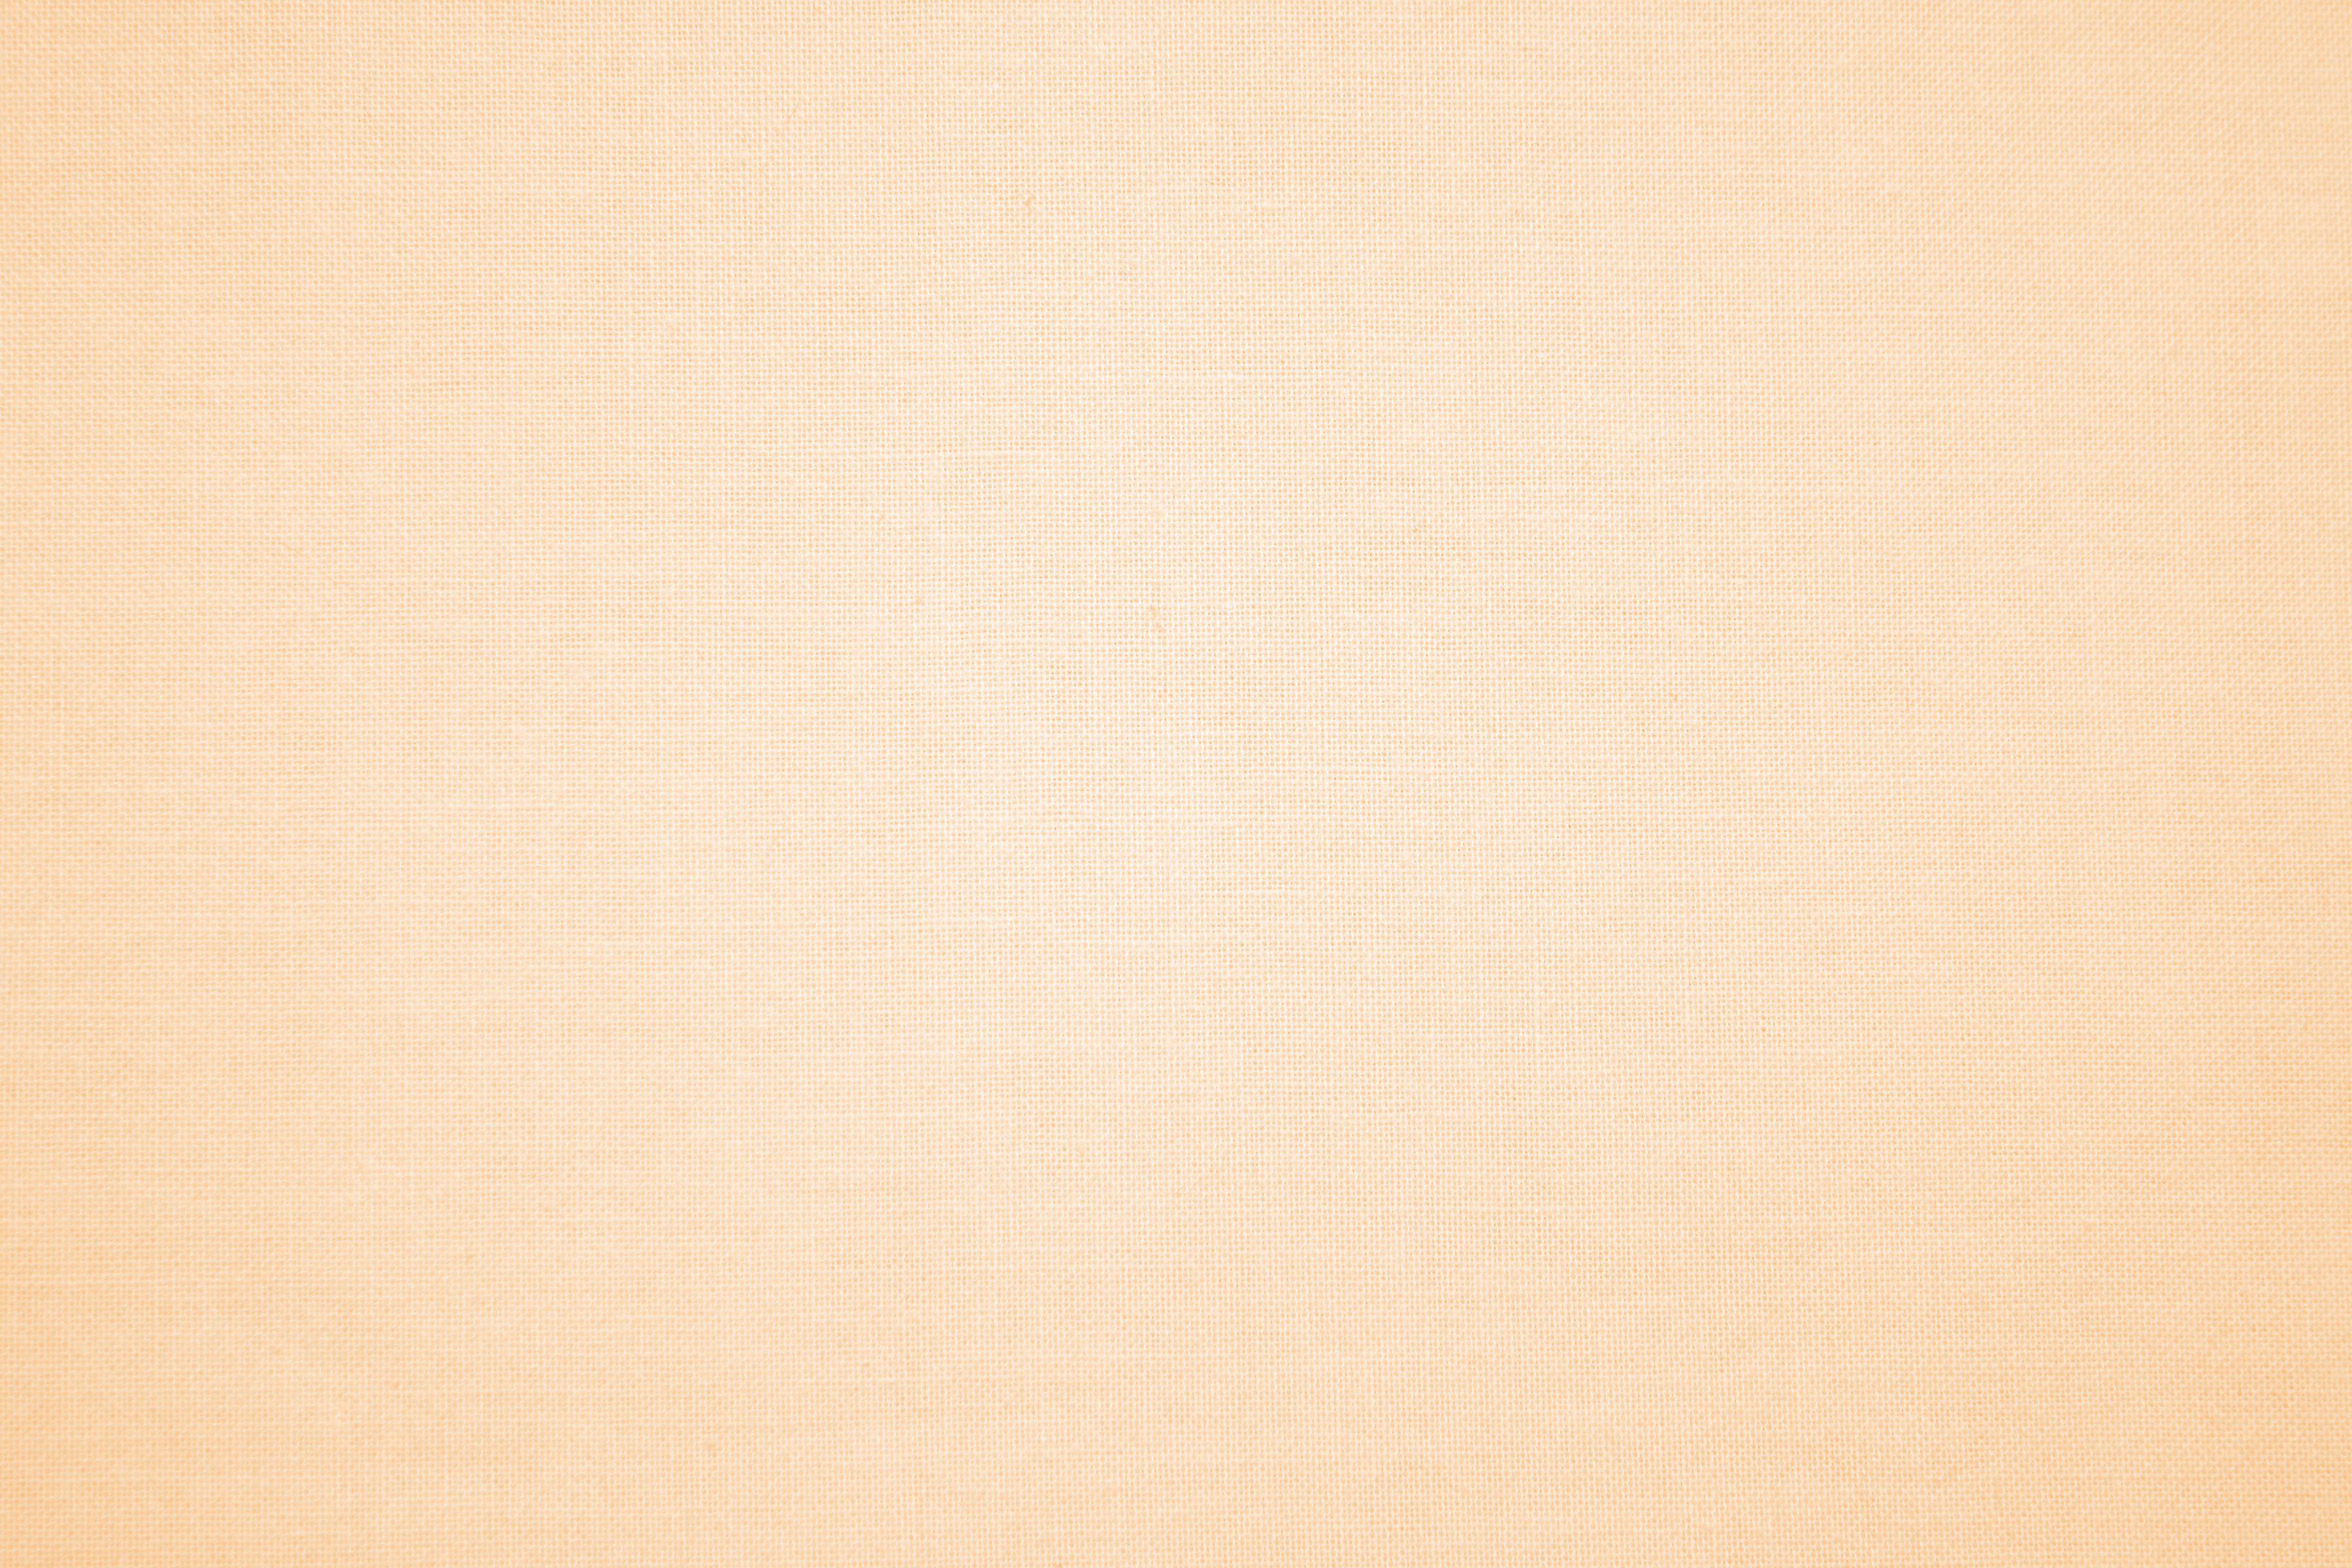 Peach Background   Pix For Web